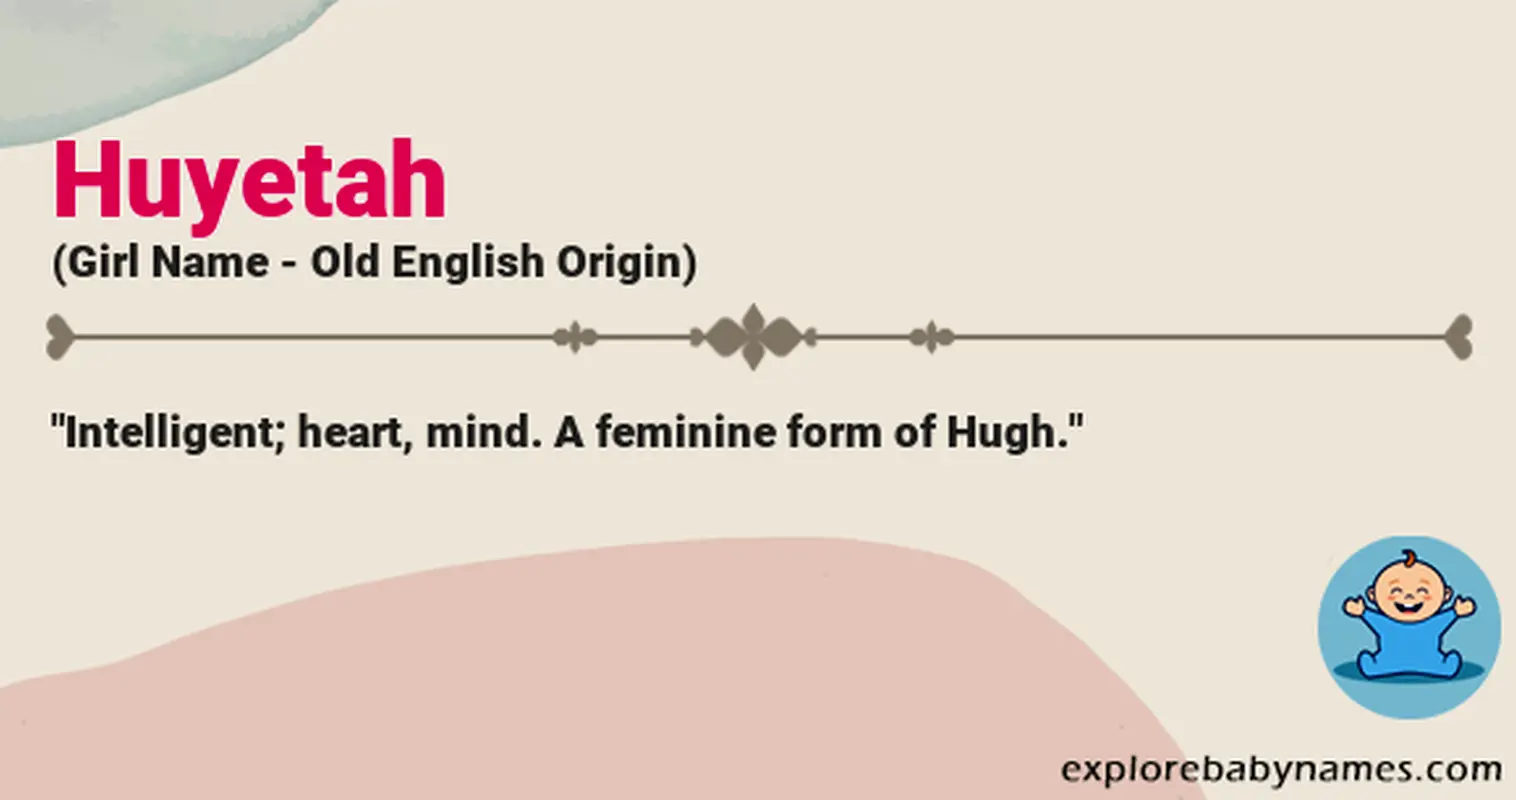 Meaning of Huyetah